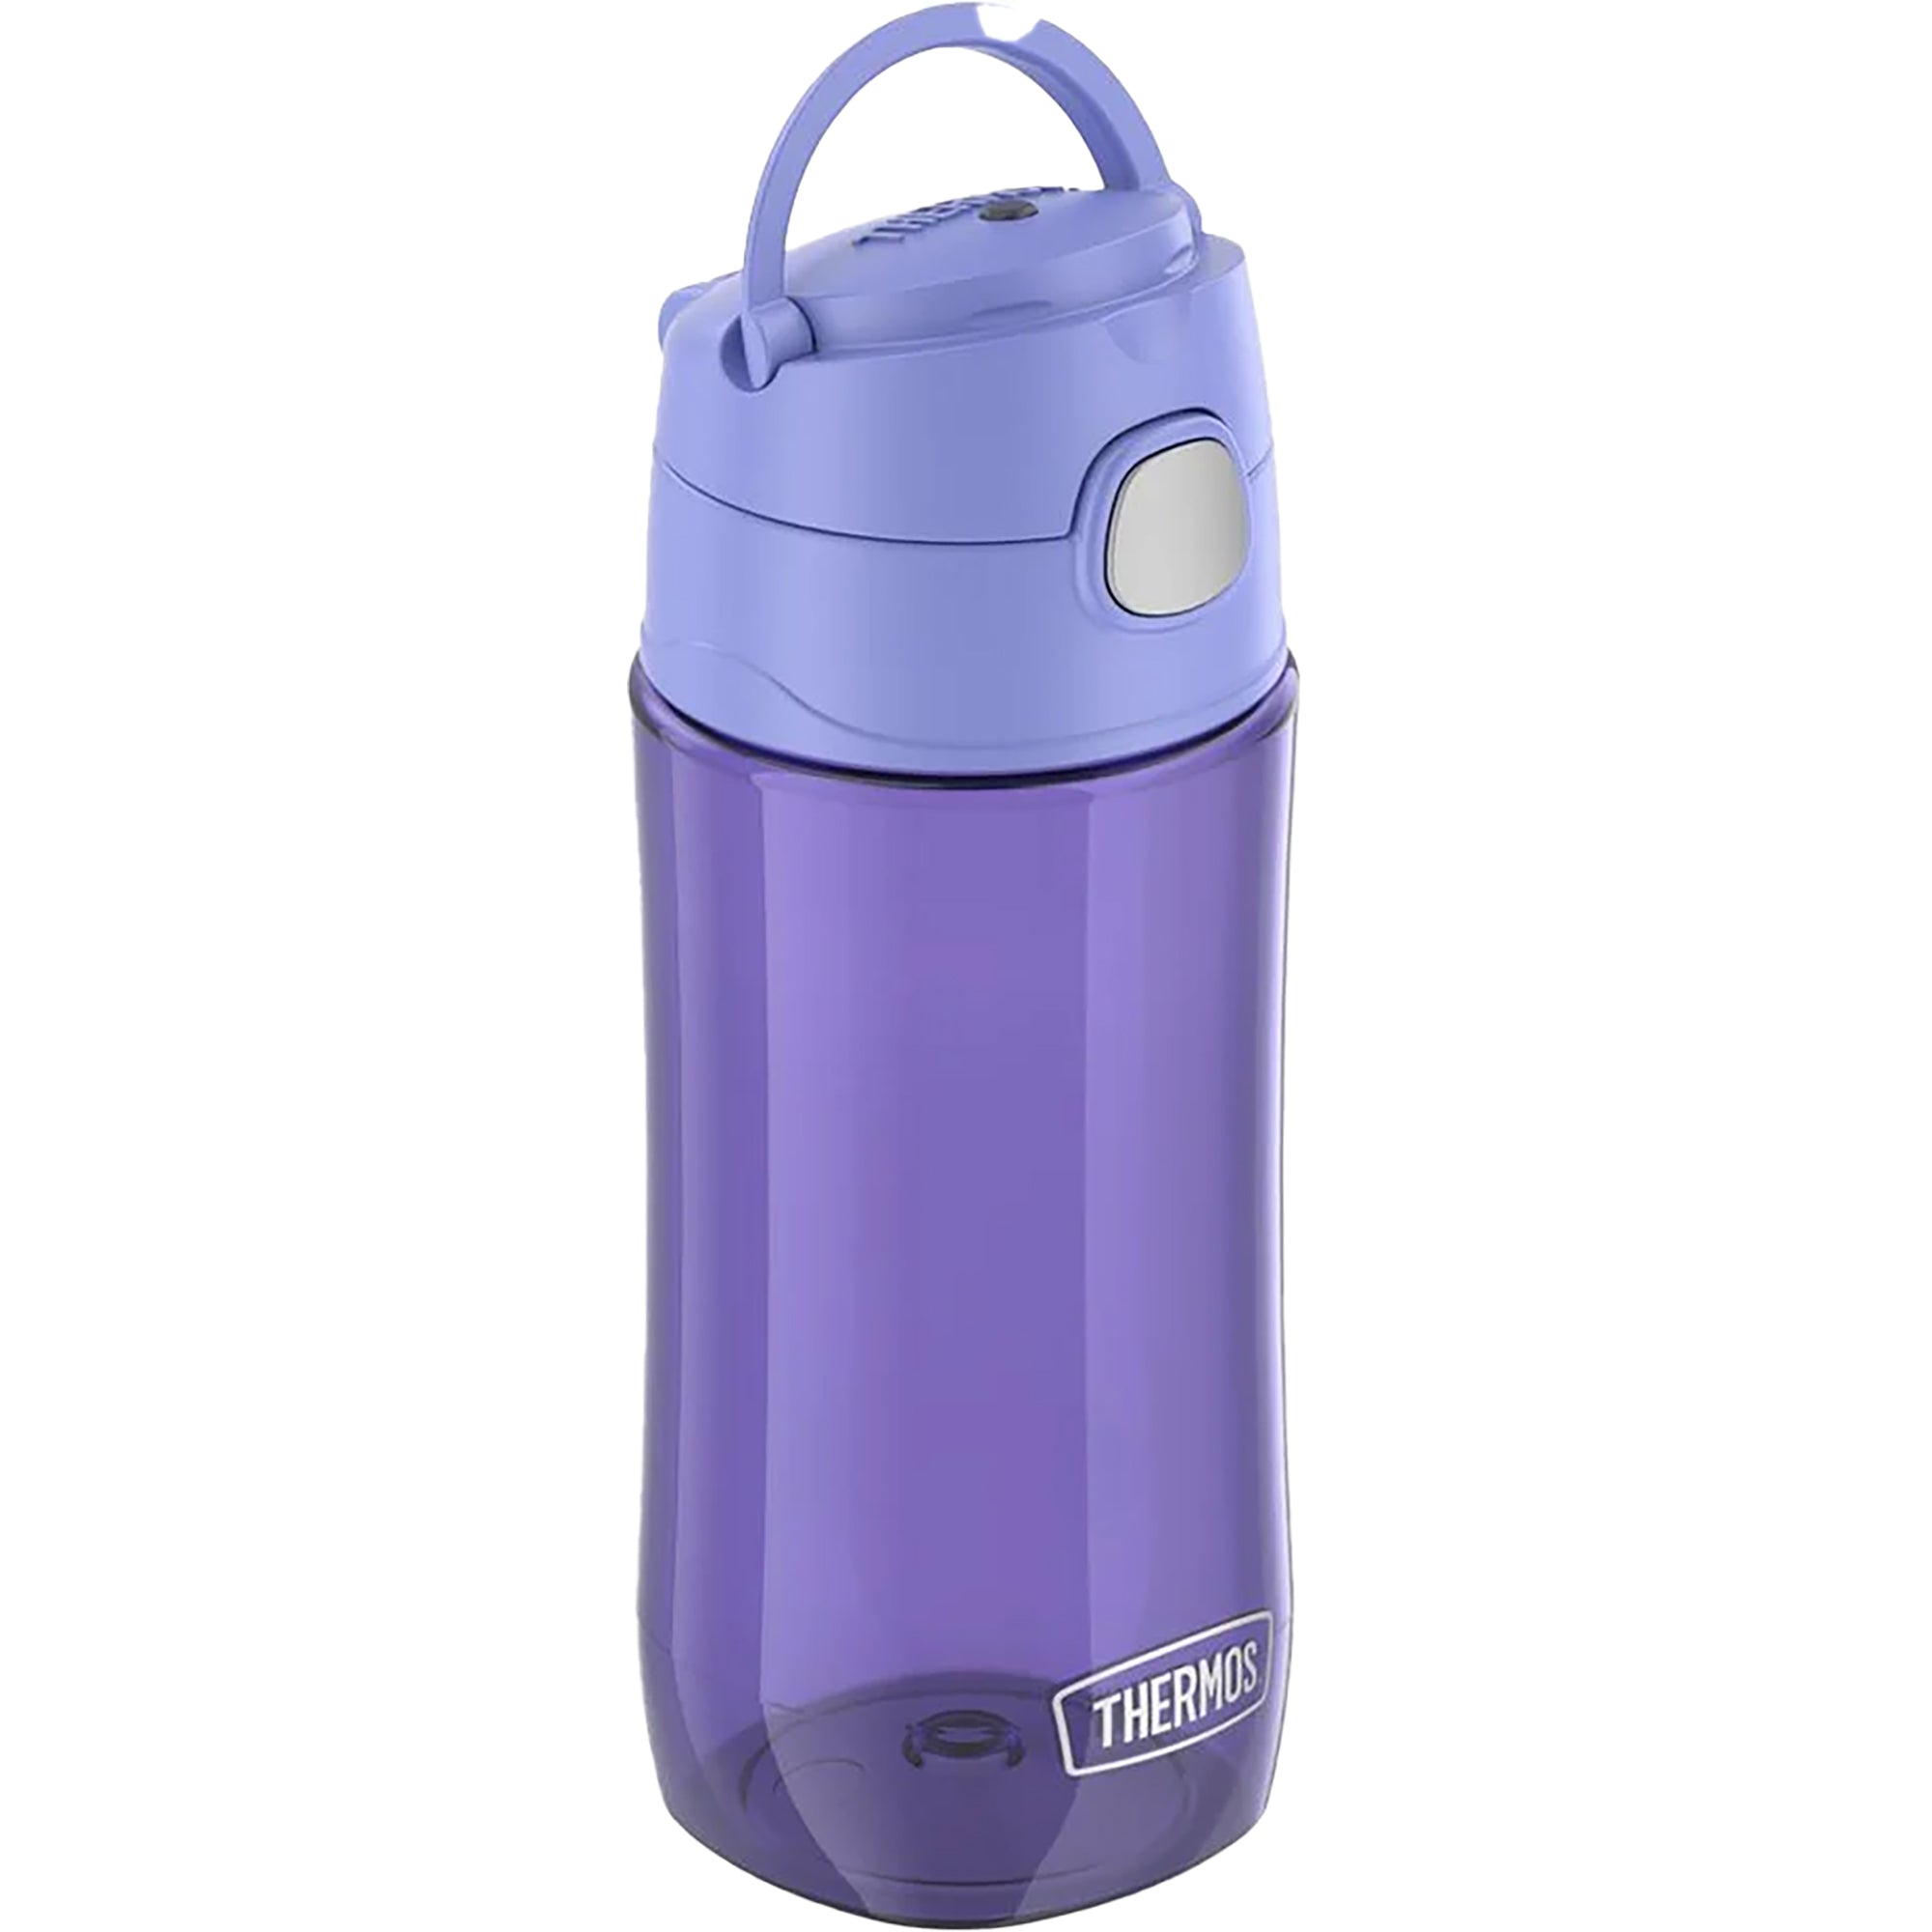 Thermos Kid's 16 oz. Funtainer Plastic Water Bottle - Lavender Thermos